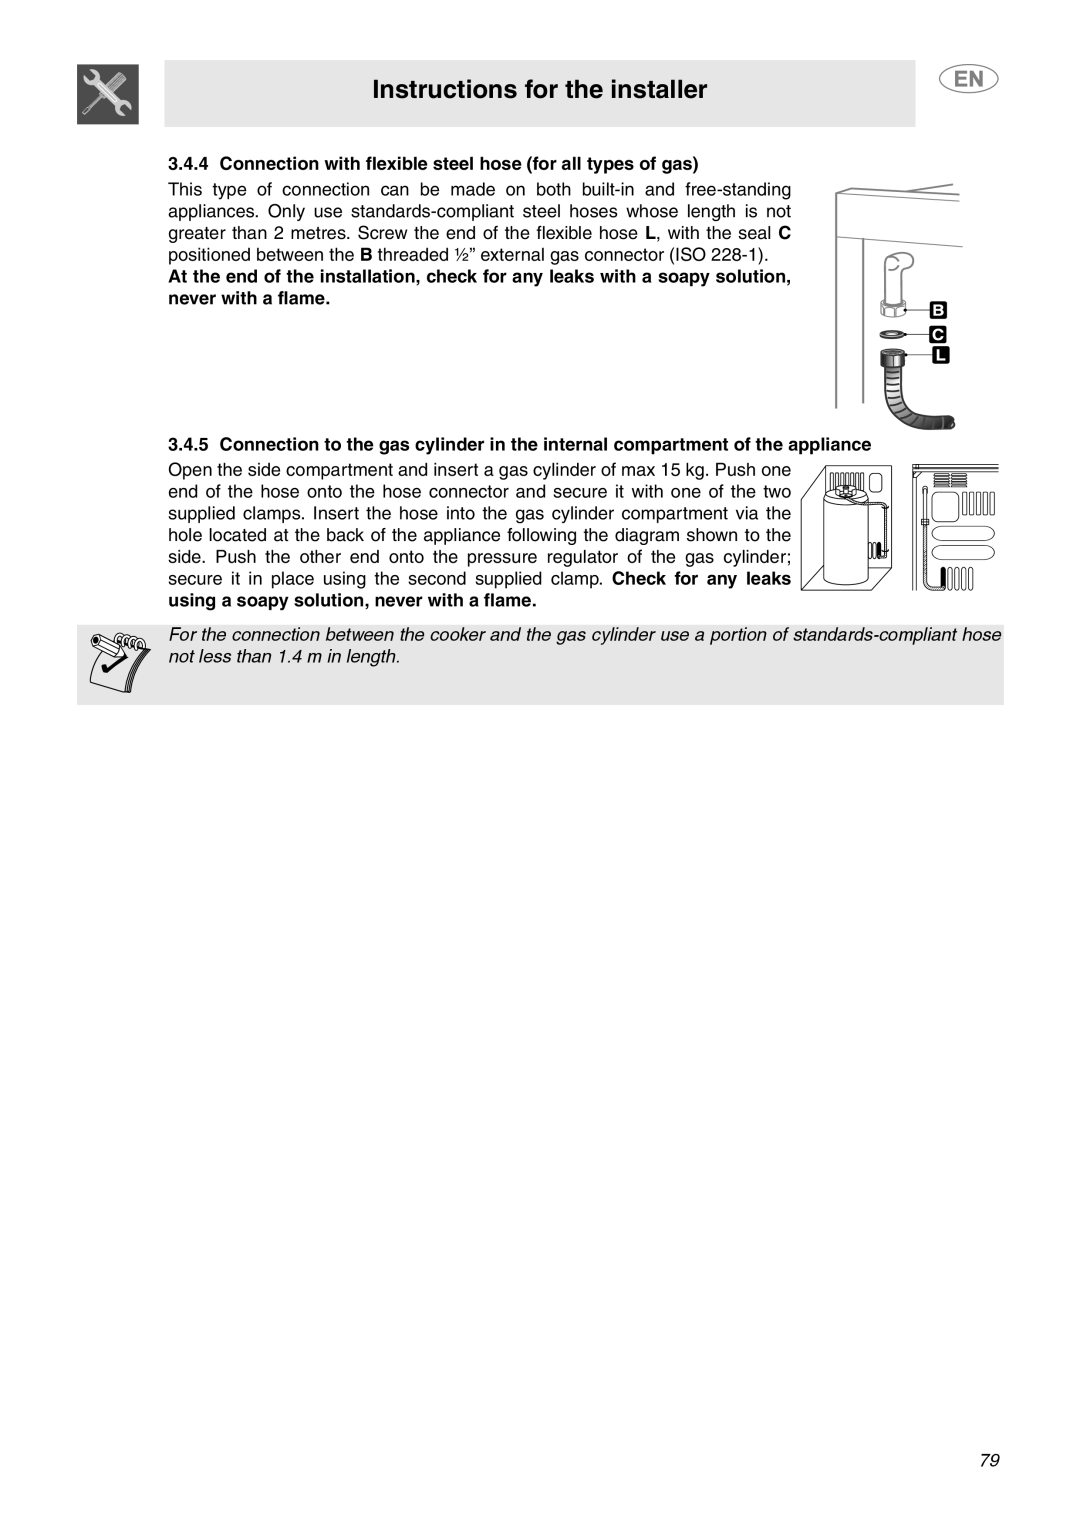 Smeg C6GVXI manual Instructions for the installer, Connection with flexible steel hose for all types of gas 